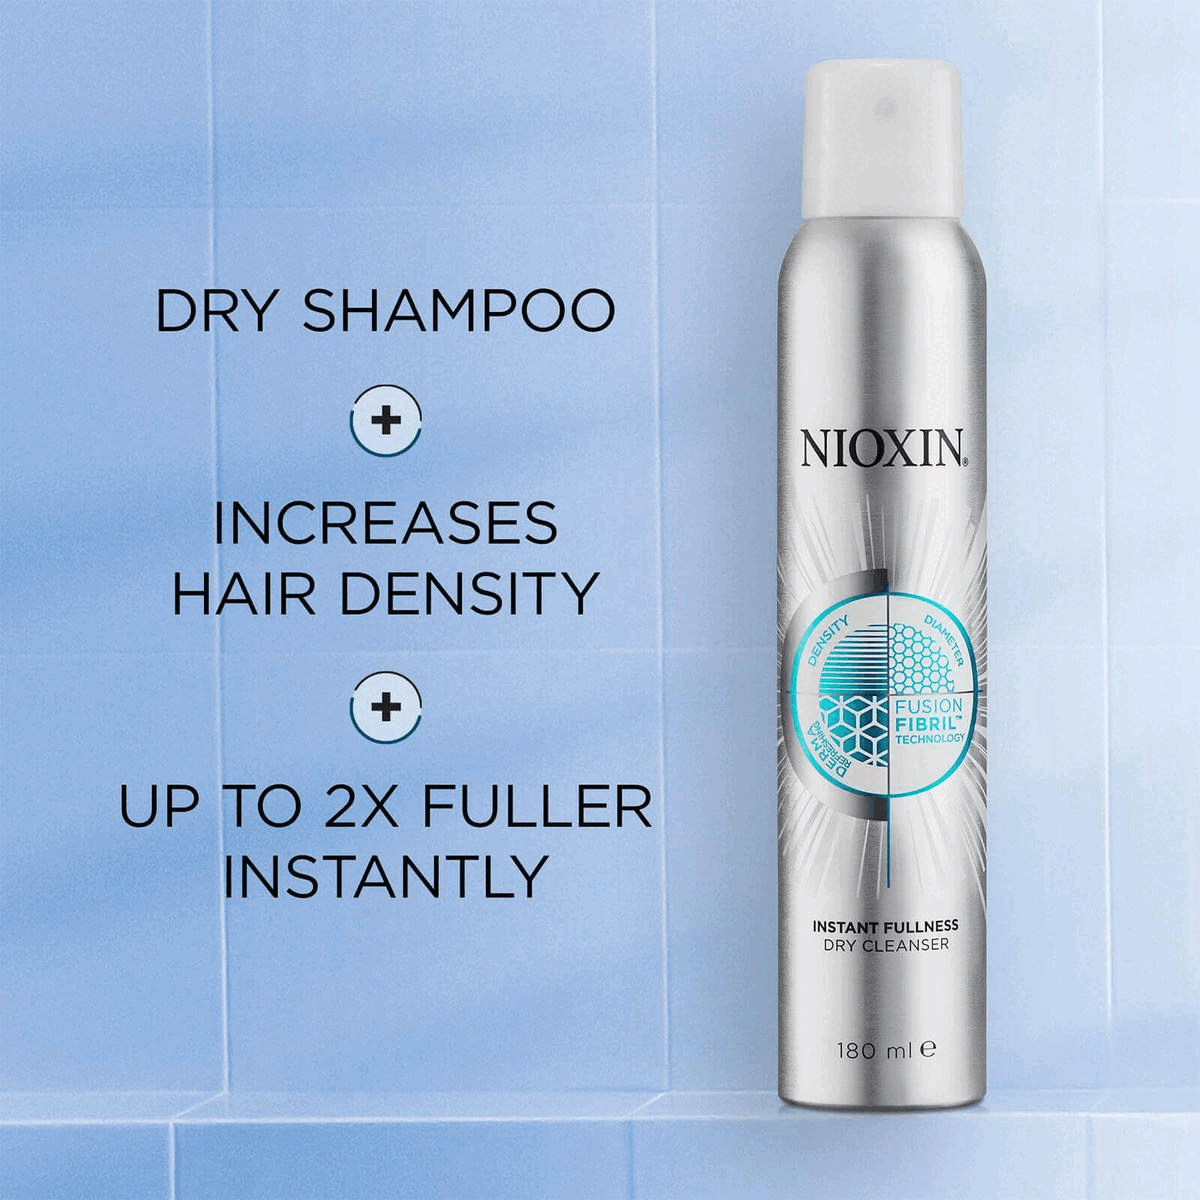 Dry shampoo + increases hair density + up to 2x fuller instantly How to use Nioxin instant fullness? A dry shampoo that volumises 1. Shake the product  2. Spray onto dry hair 3. Brush through 4. Style as desired Refreshed dense looking hair Density, diameter, fusion fibril technology, derma refreshing

              